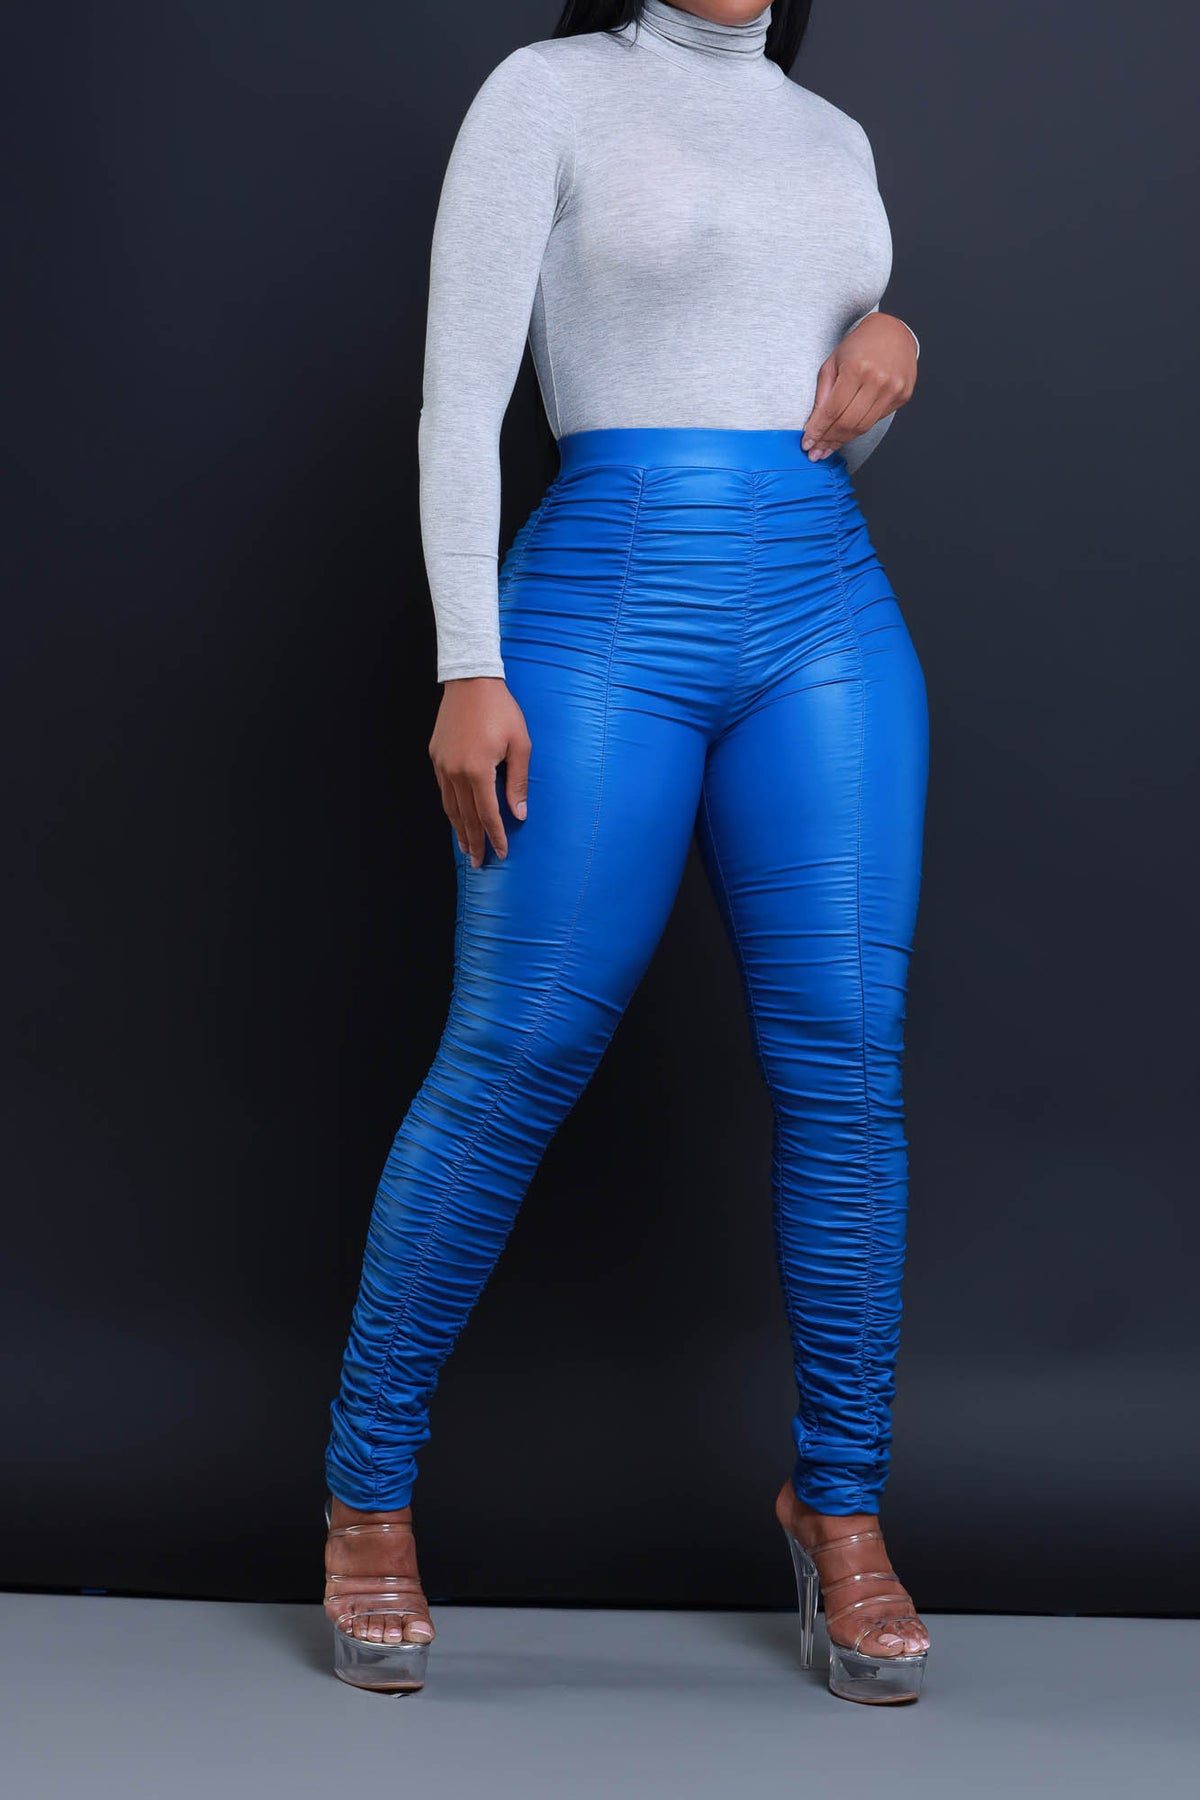 
              Be Honest Ruched High Waist Pants - Royal Blue Faux Leather Leggings - Swank A Posh
            